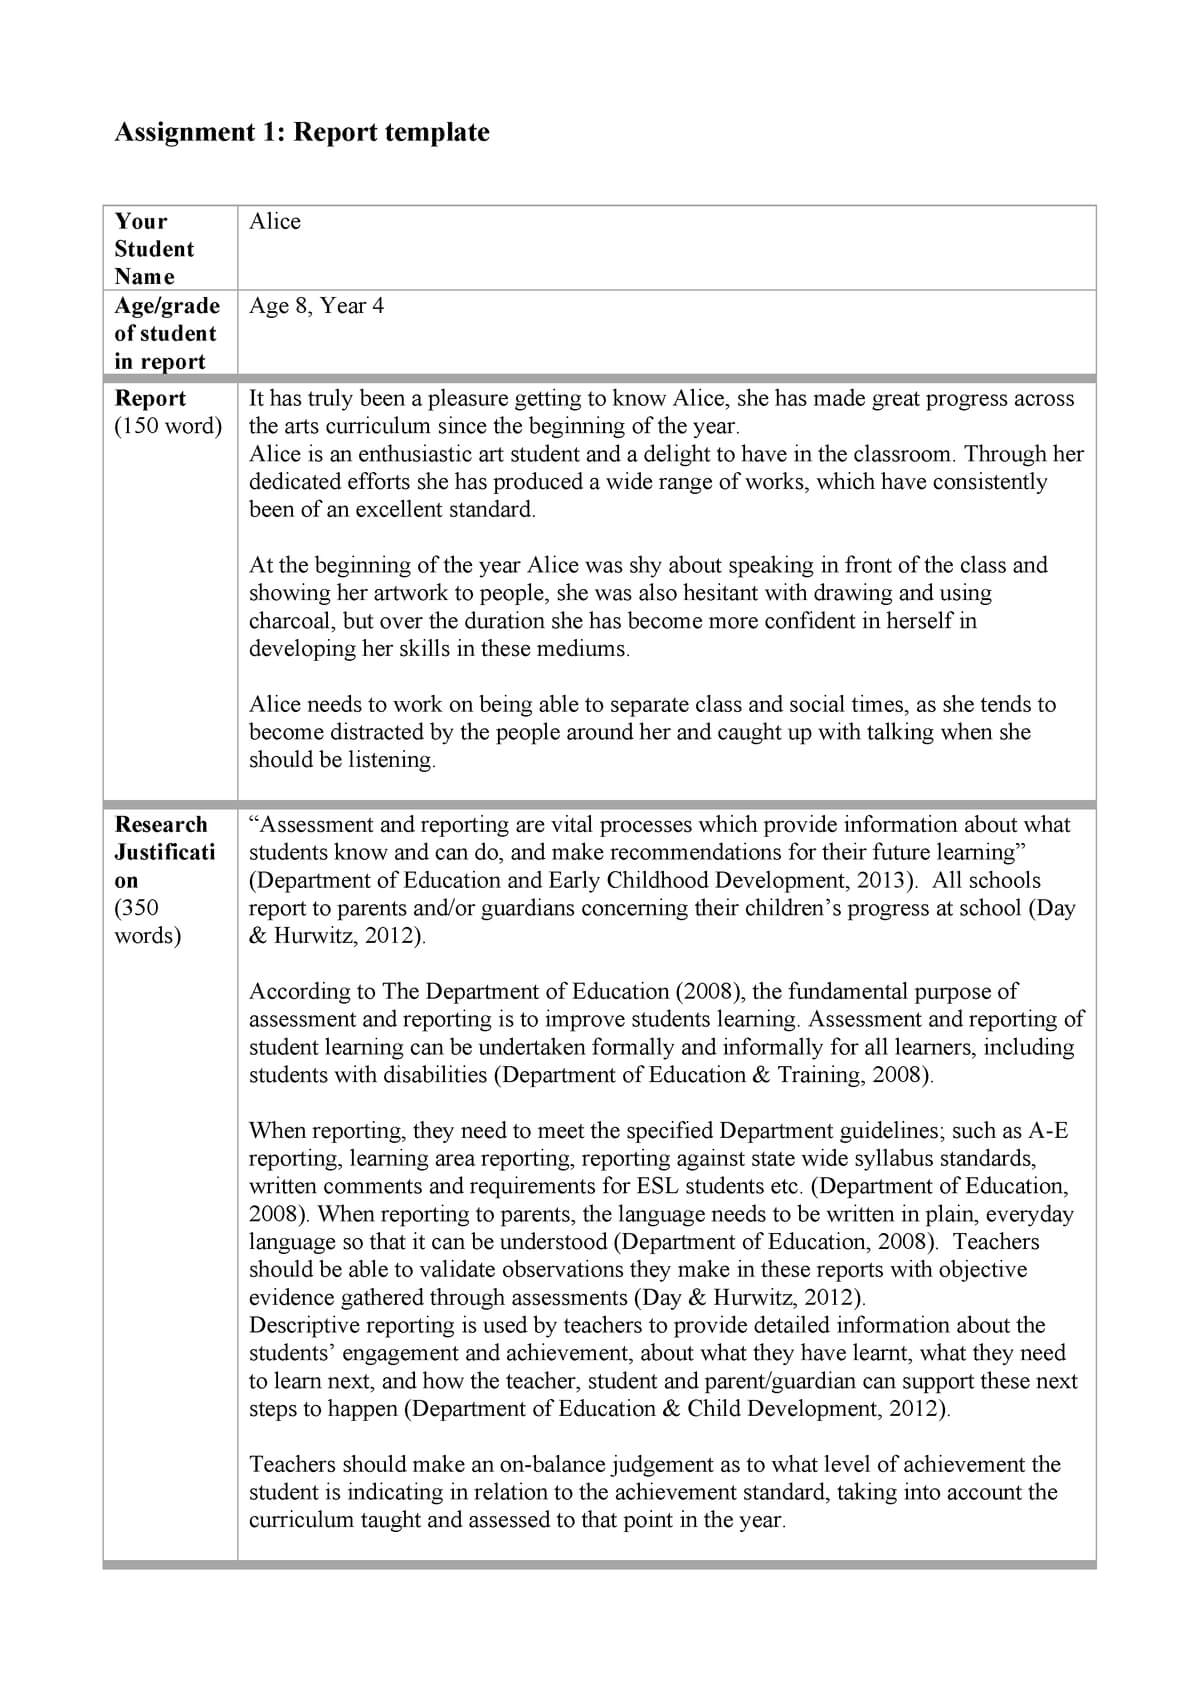 Report Template – Assignment – 6890 Arts Education 2 – Uc Pertaining To Assignment Report Template